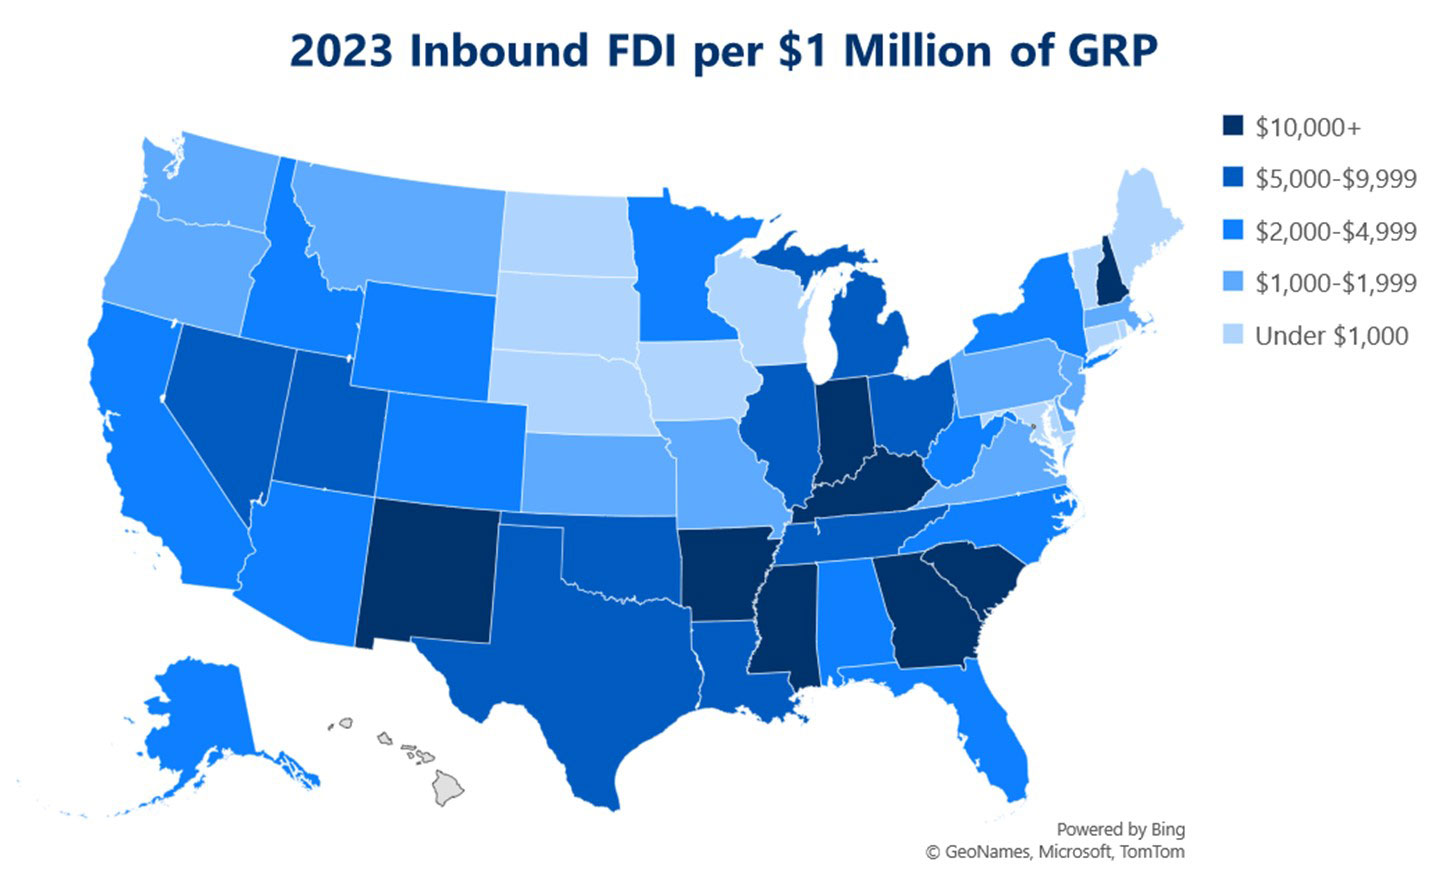 Map shows states' inbound foreign direct investment rates in 2023 per $1 million of GRP